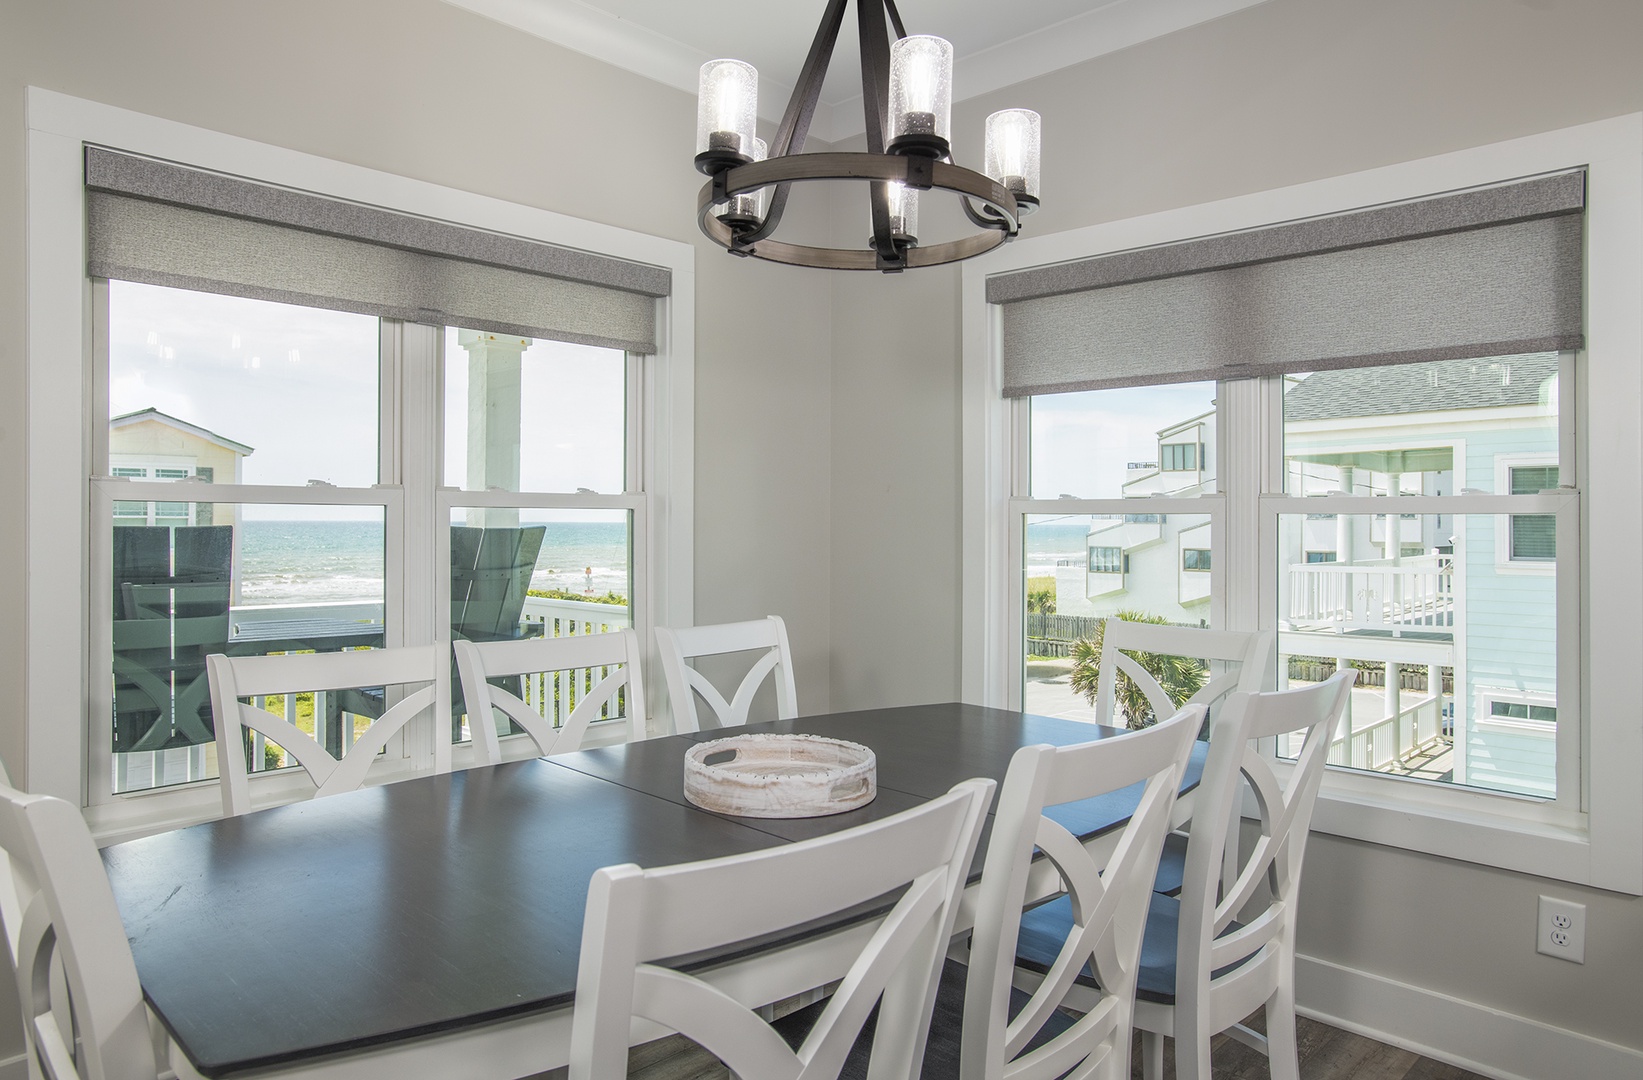 Dining Room Area with Ocean Views